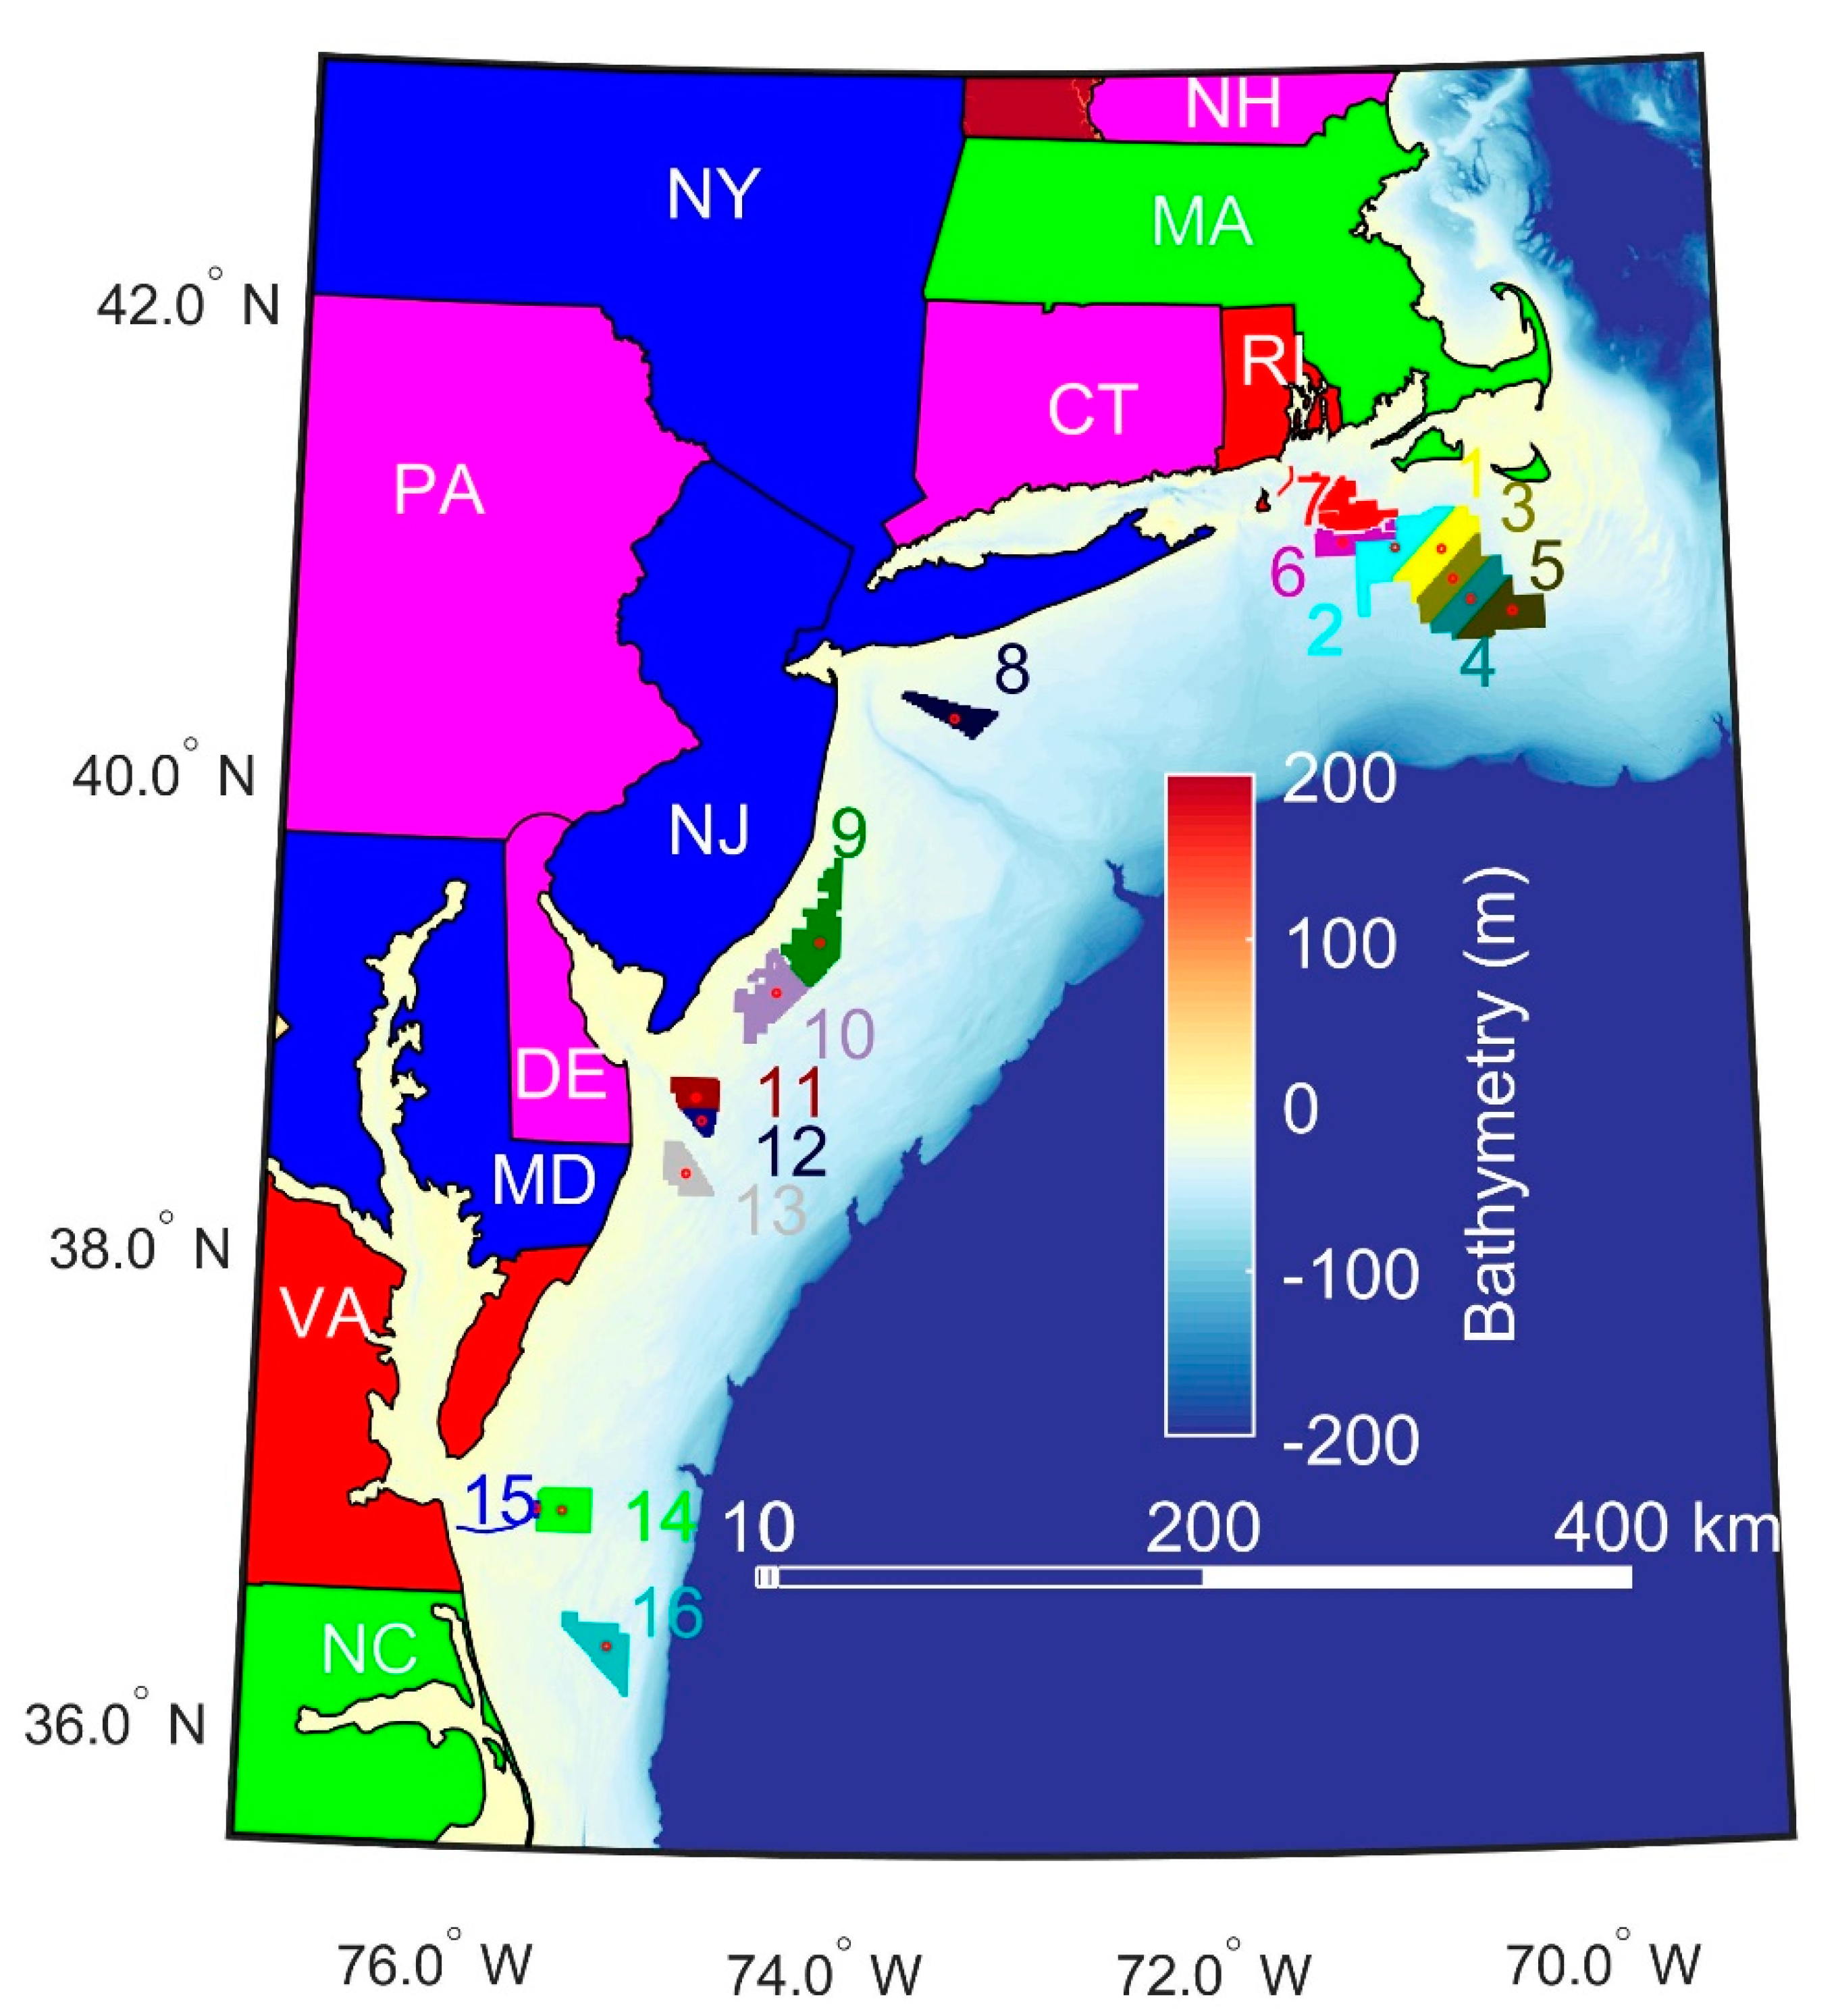 Energies | Free Full-Text | Extreme Wind and Waves in U.S. East Coast  Offshore Wind Energy Lease Areas